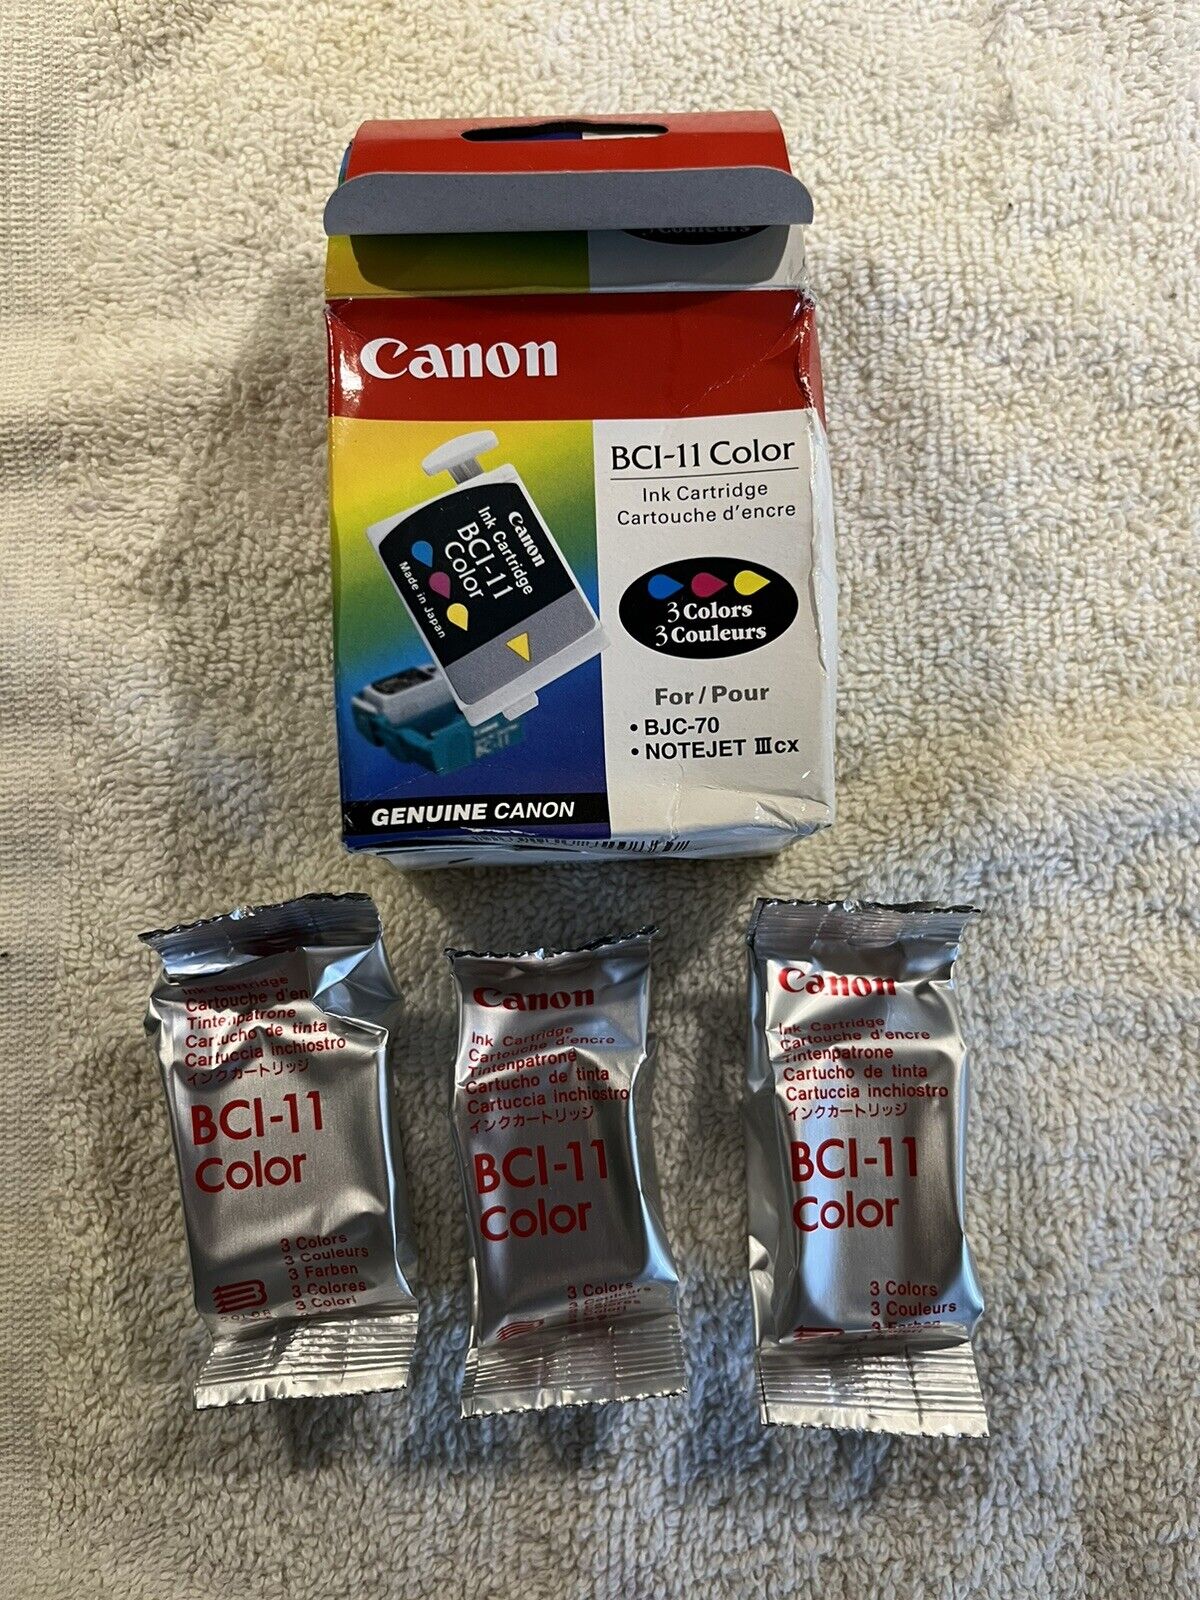 3 Genuine Canon BCI-11 Color Ink Cartridges Open Box